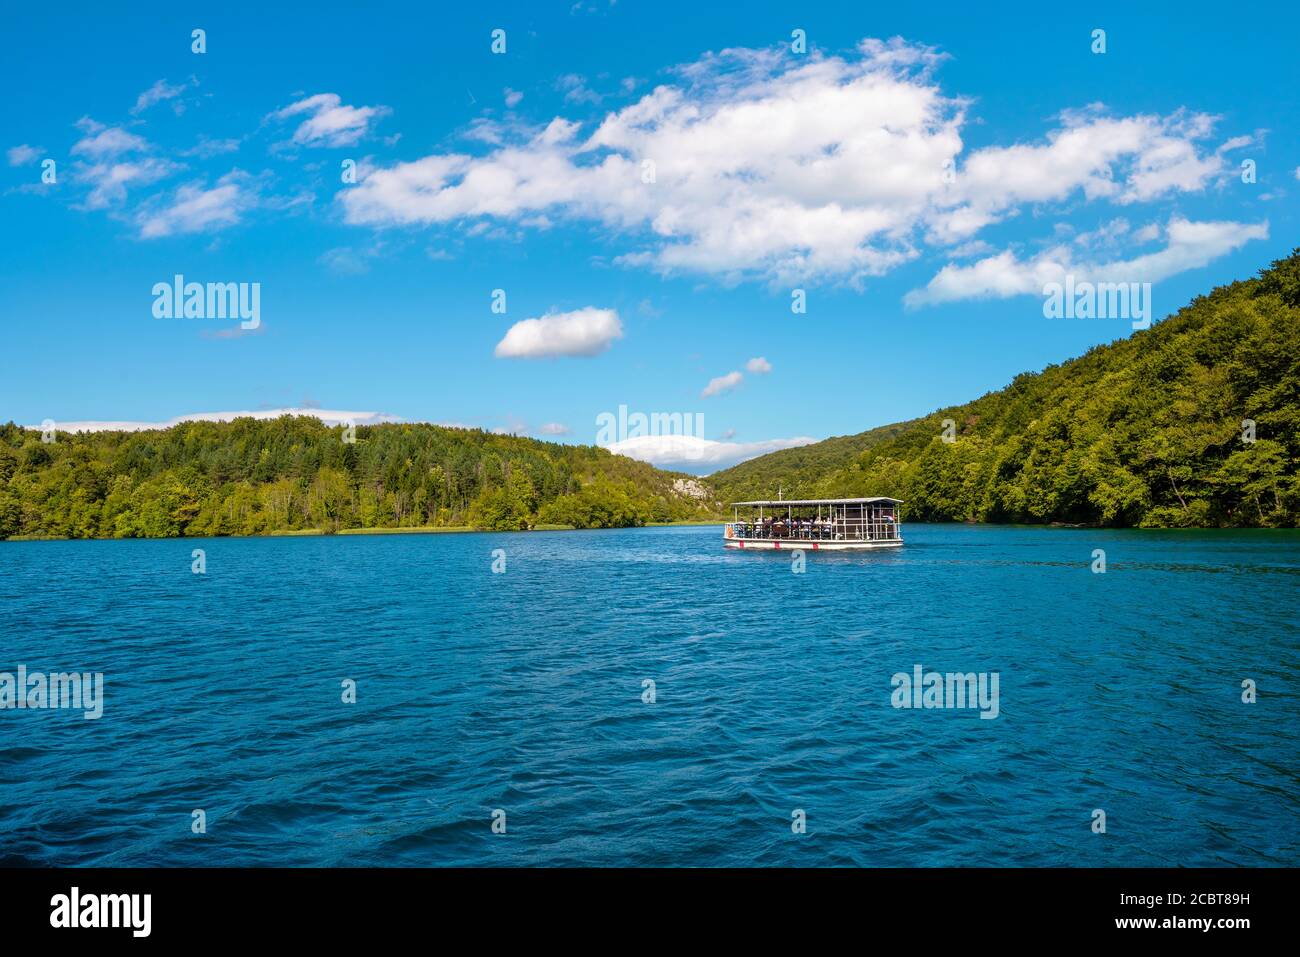 Scenic view of blue lake with touristic ferry in Plitvice Lakes national park. Croatia Stock Photo